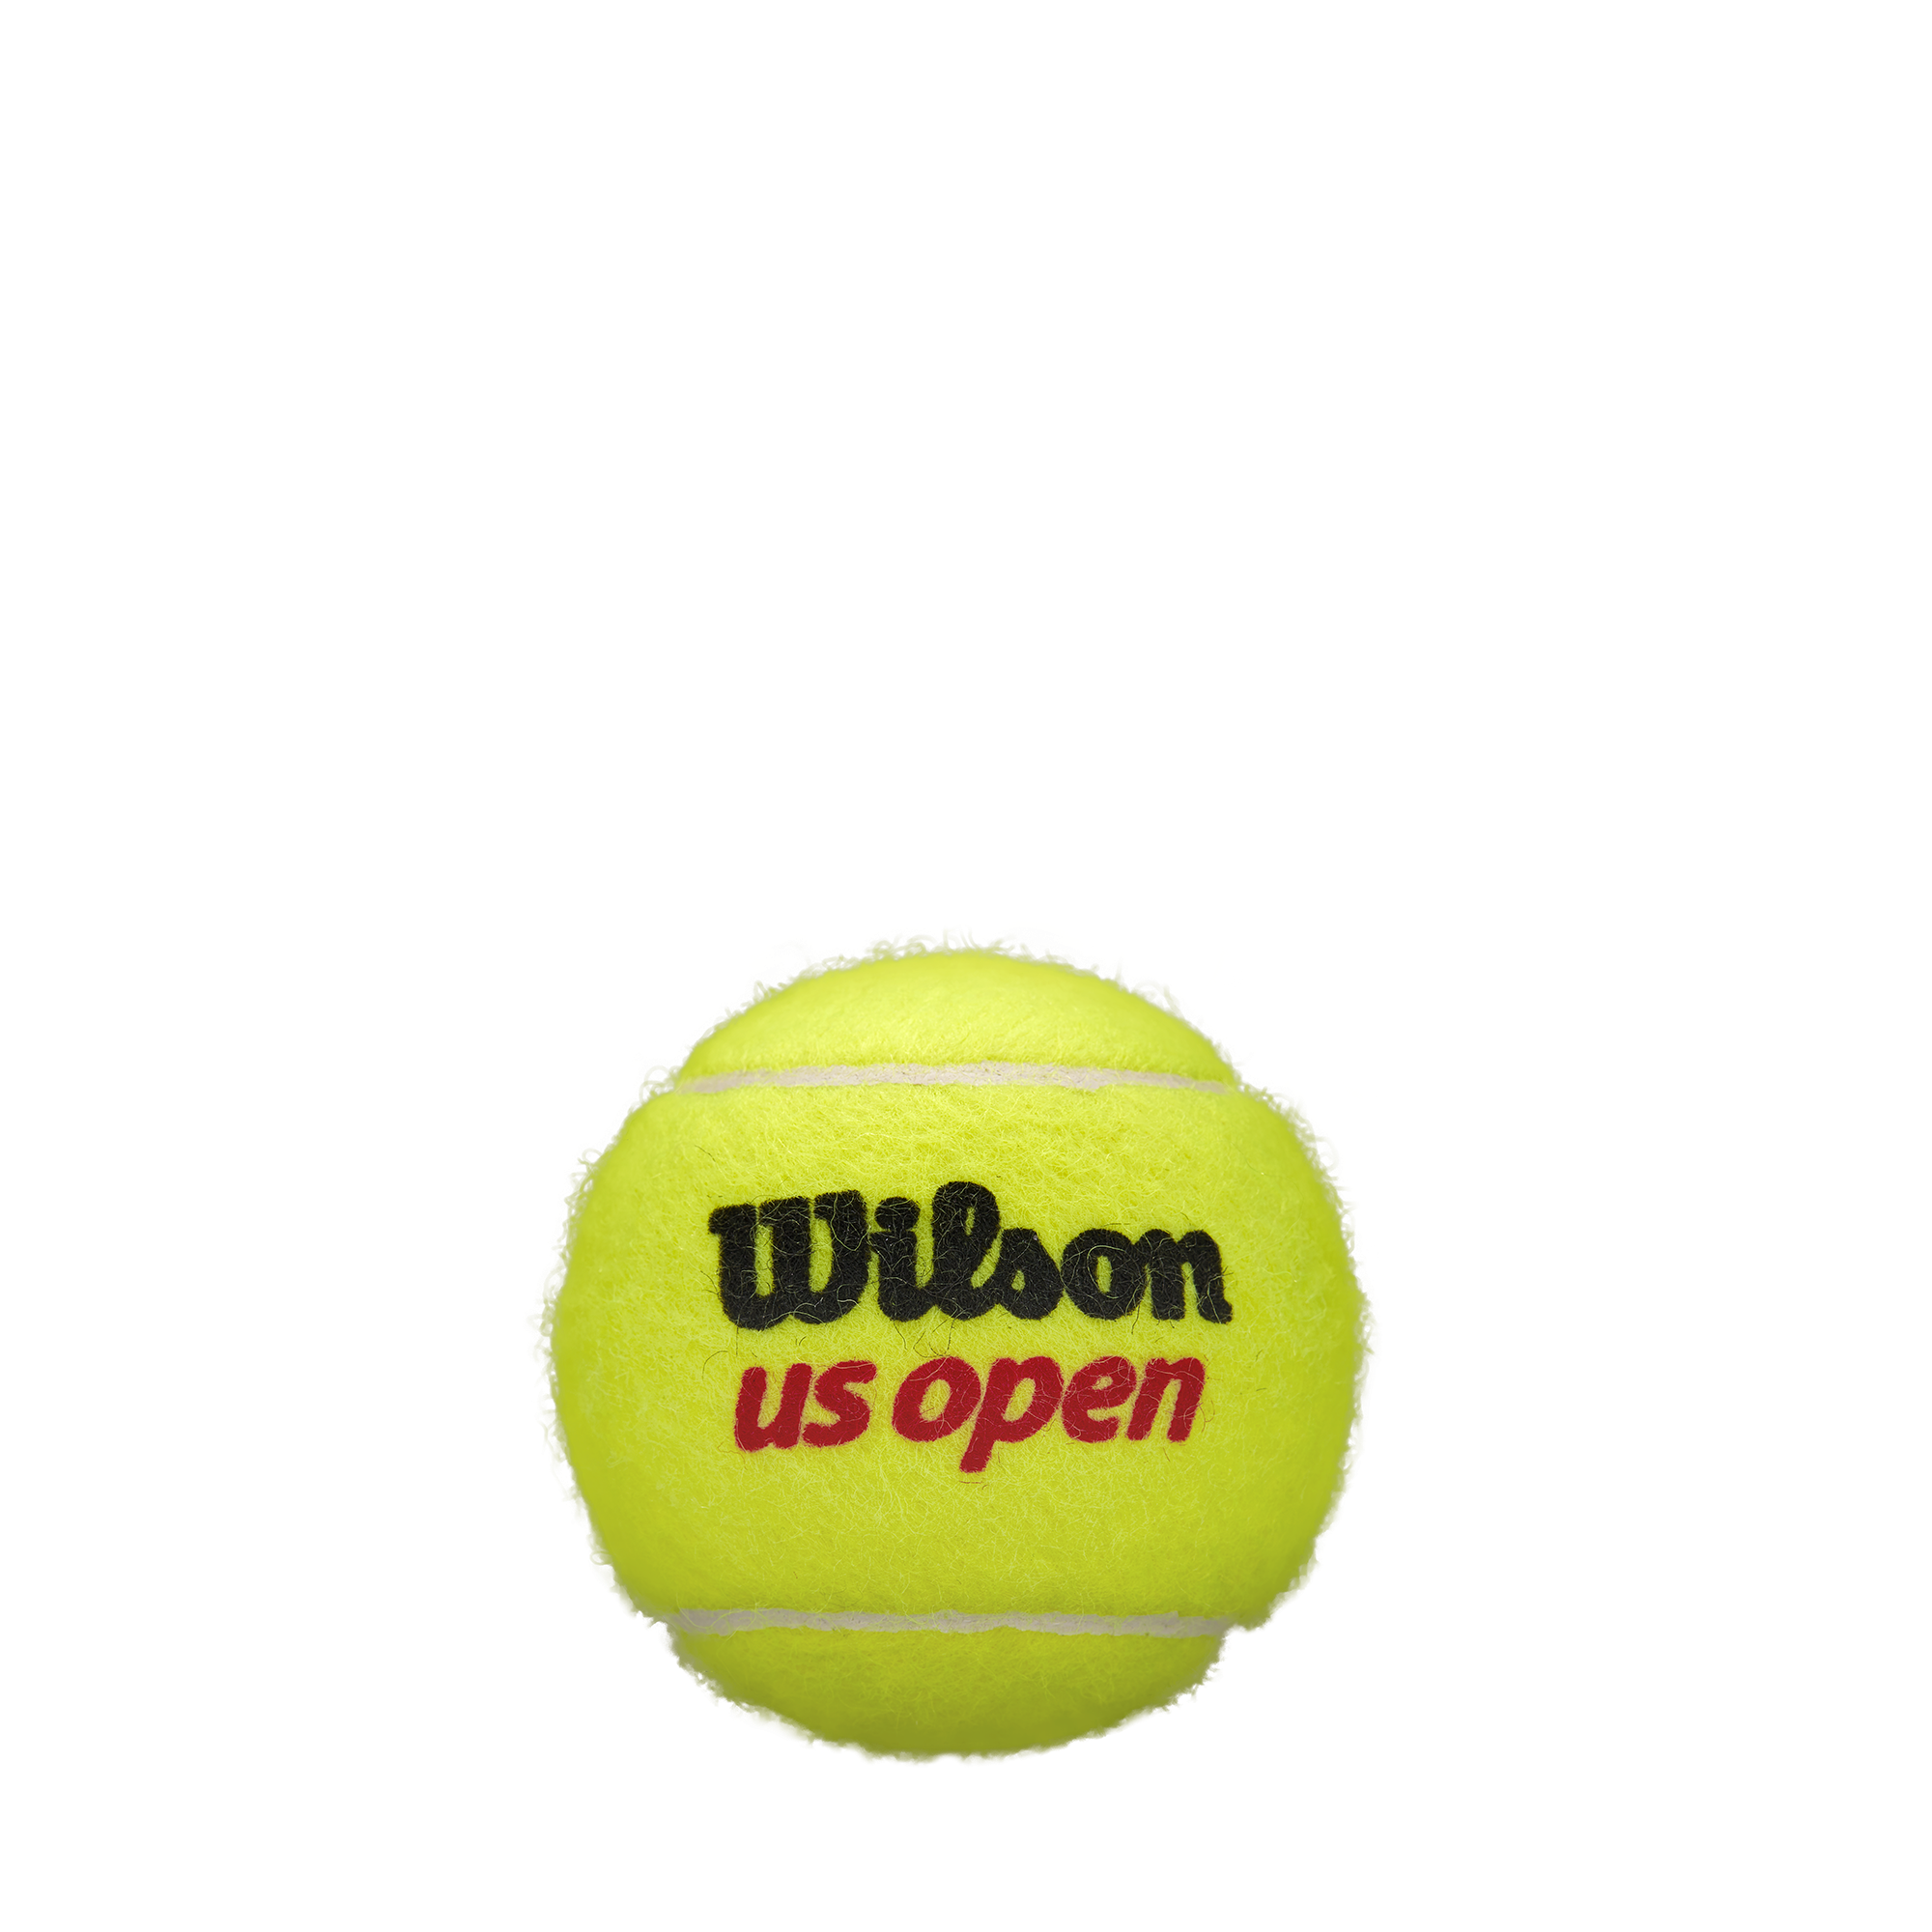 Wilson Us Open Extra Duty - Individual Can (4 Balls)